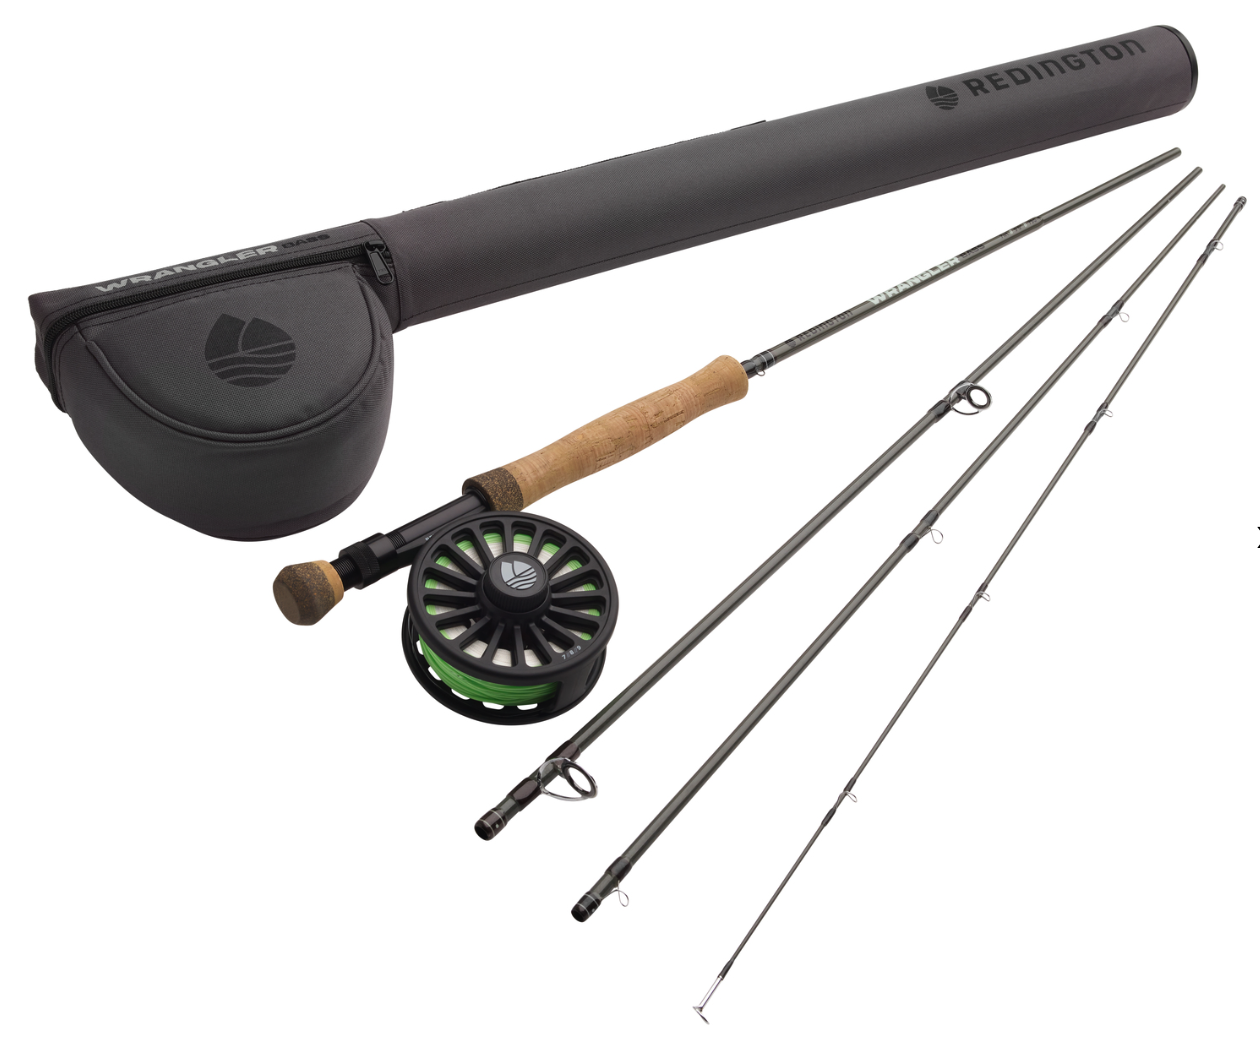 Redington Wrangler Bass Kit 790-4, Bass Fly Fishing Outfit Online, Bass Fly  Fish Gear, Fly Rod Reel Combo For Bass